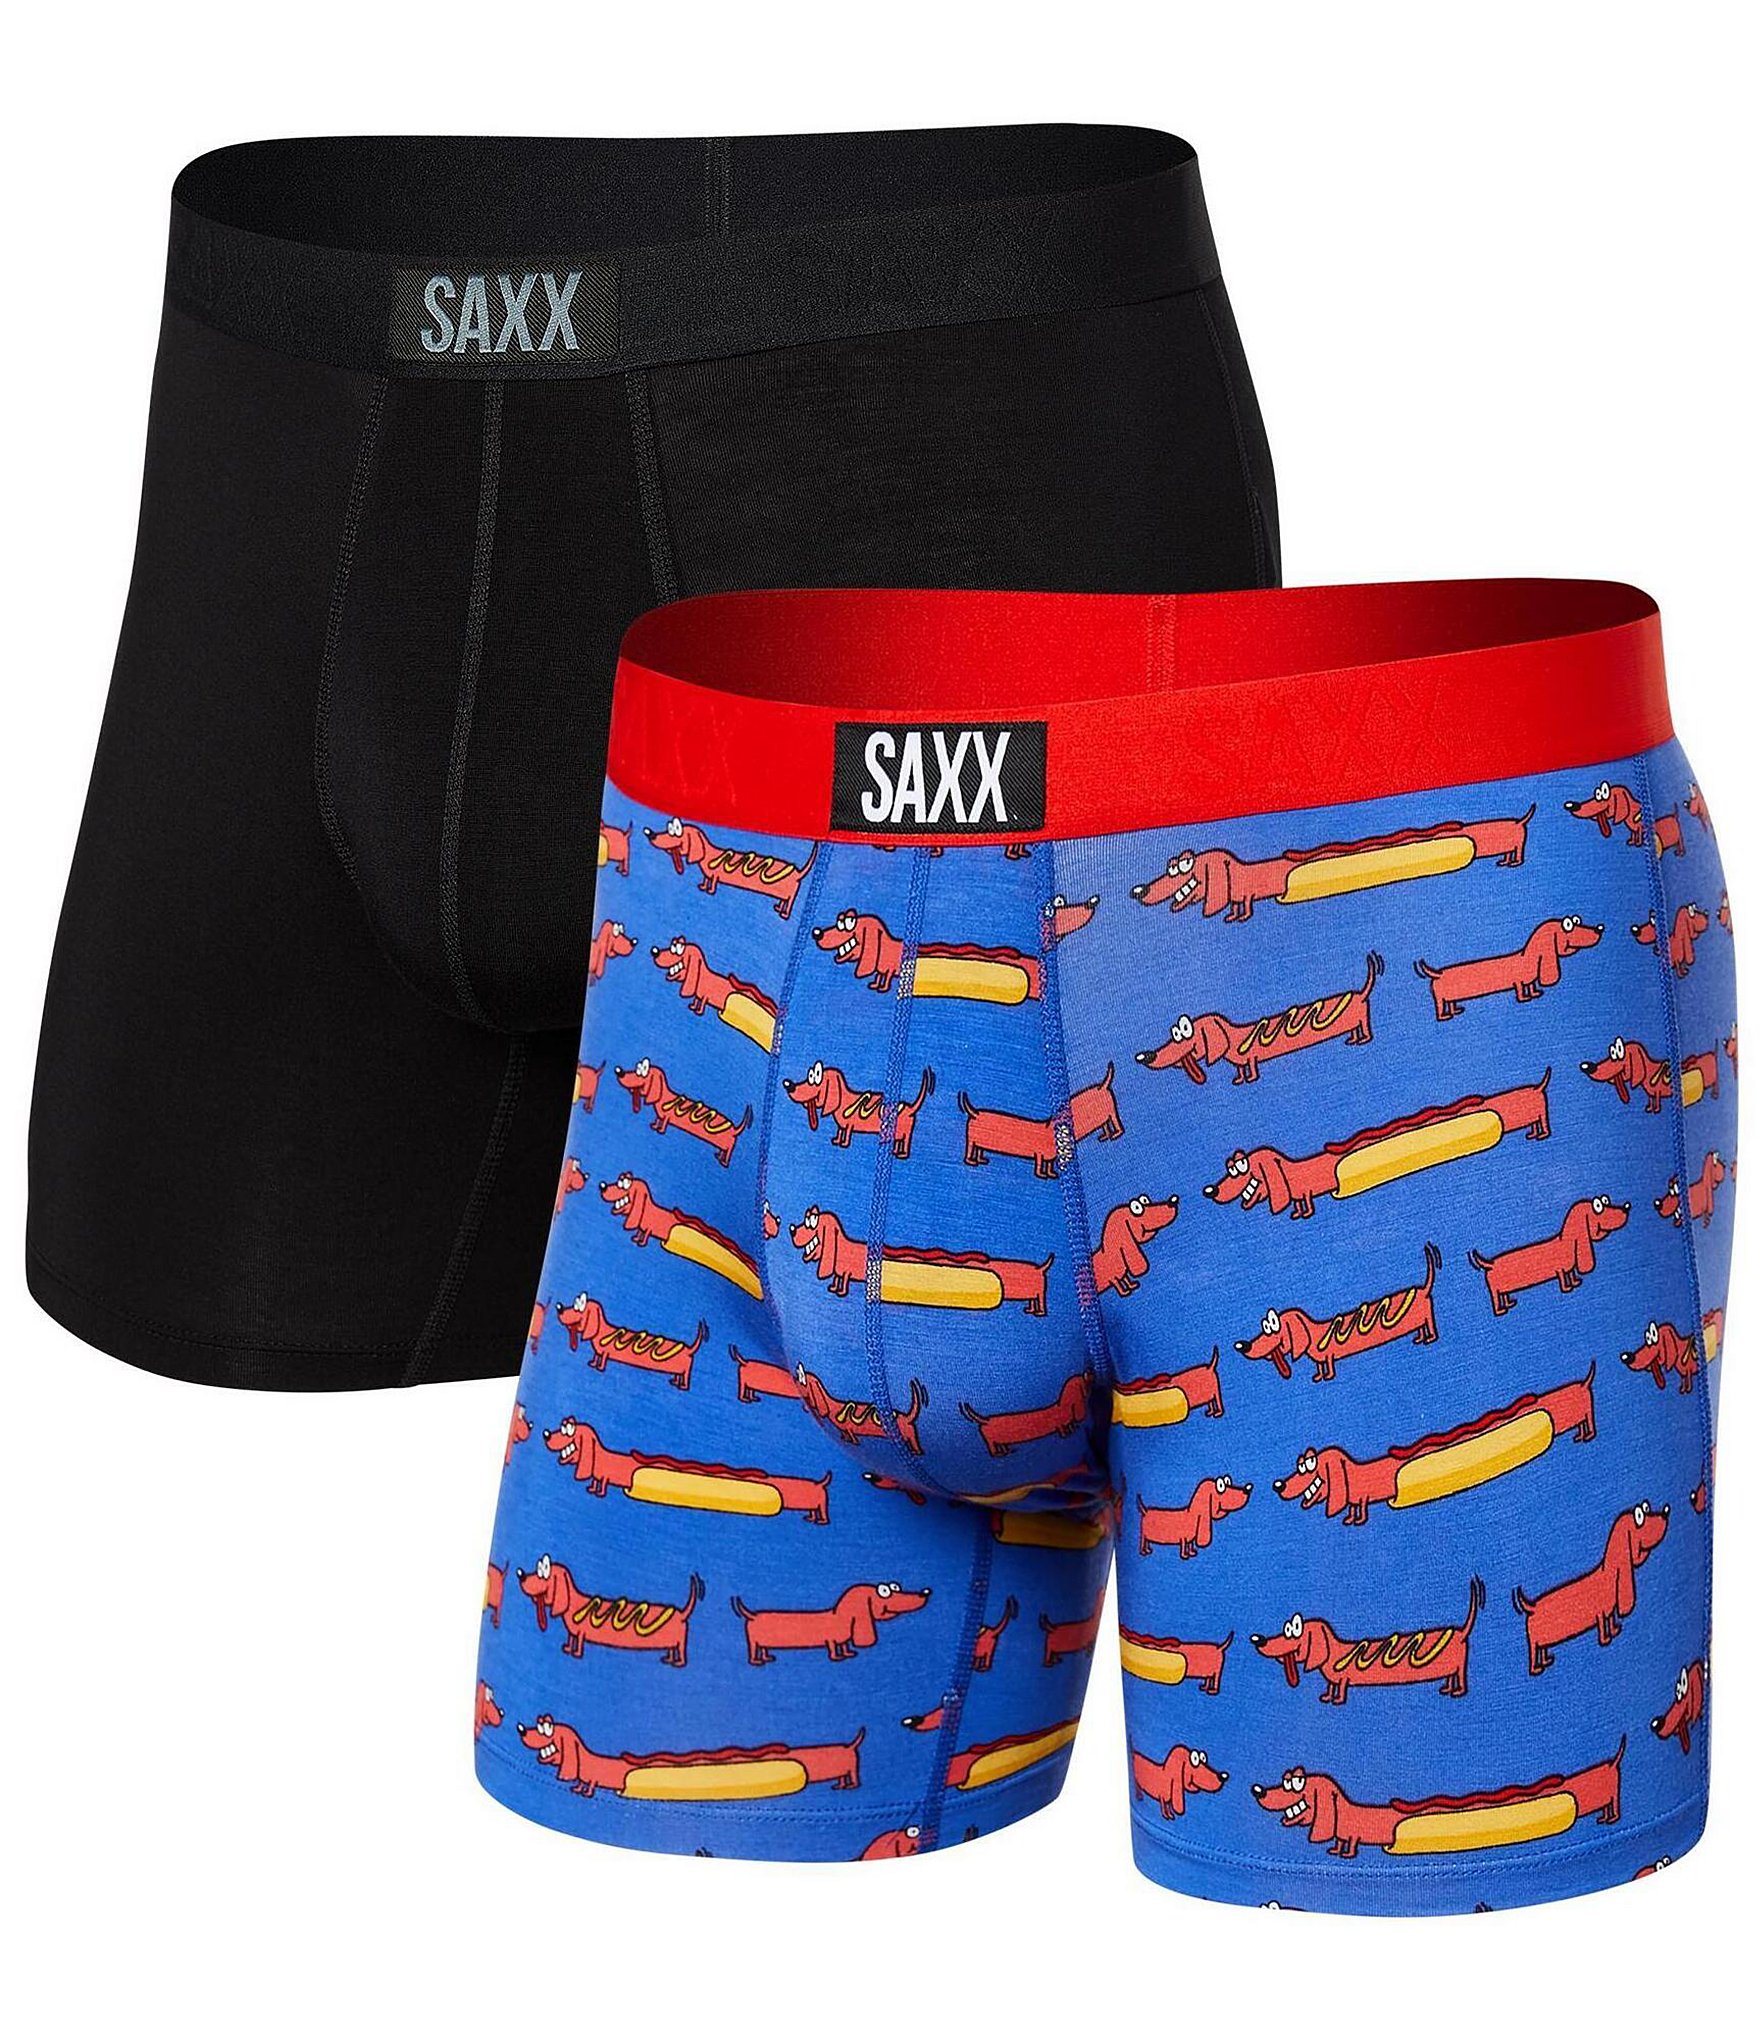 SAXX Vibe 2 Pack Stretch Boxer Briefs - Men's Boxers in Piece and Love